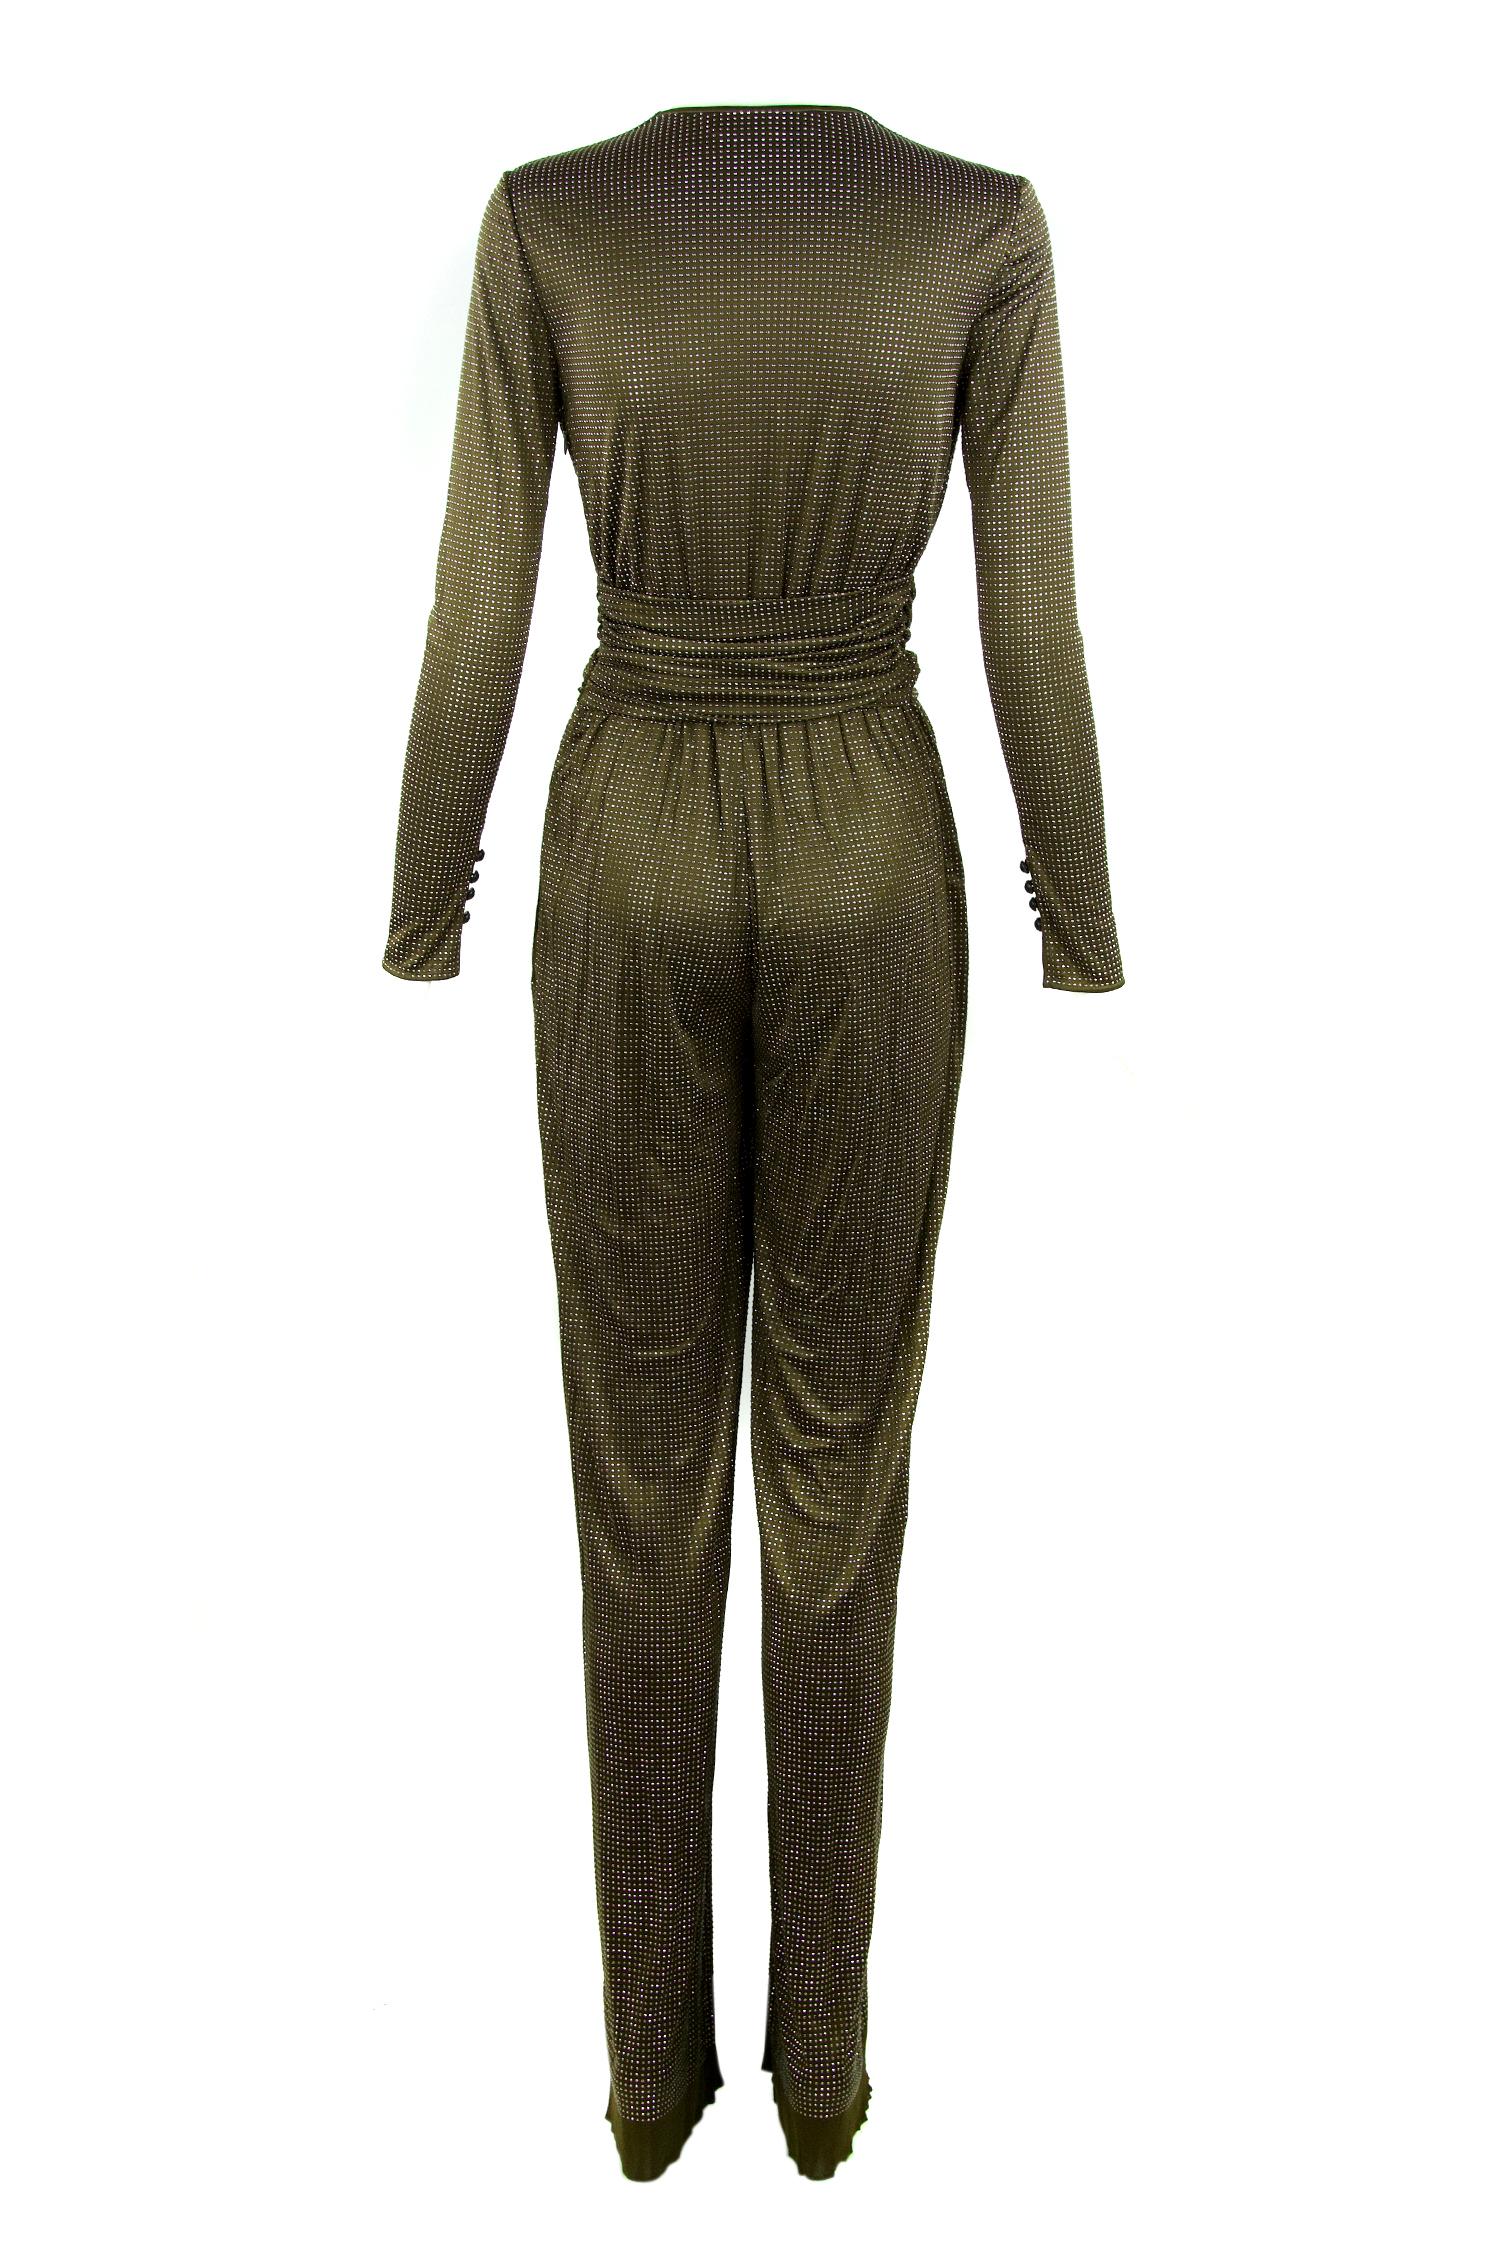 Black Pucci Brown & Silver Beaded Jumpsuit - Size IT 44